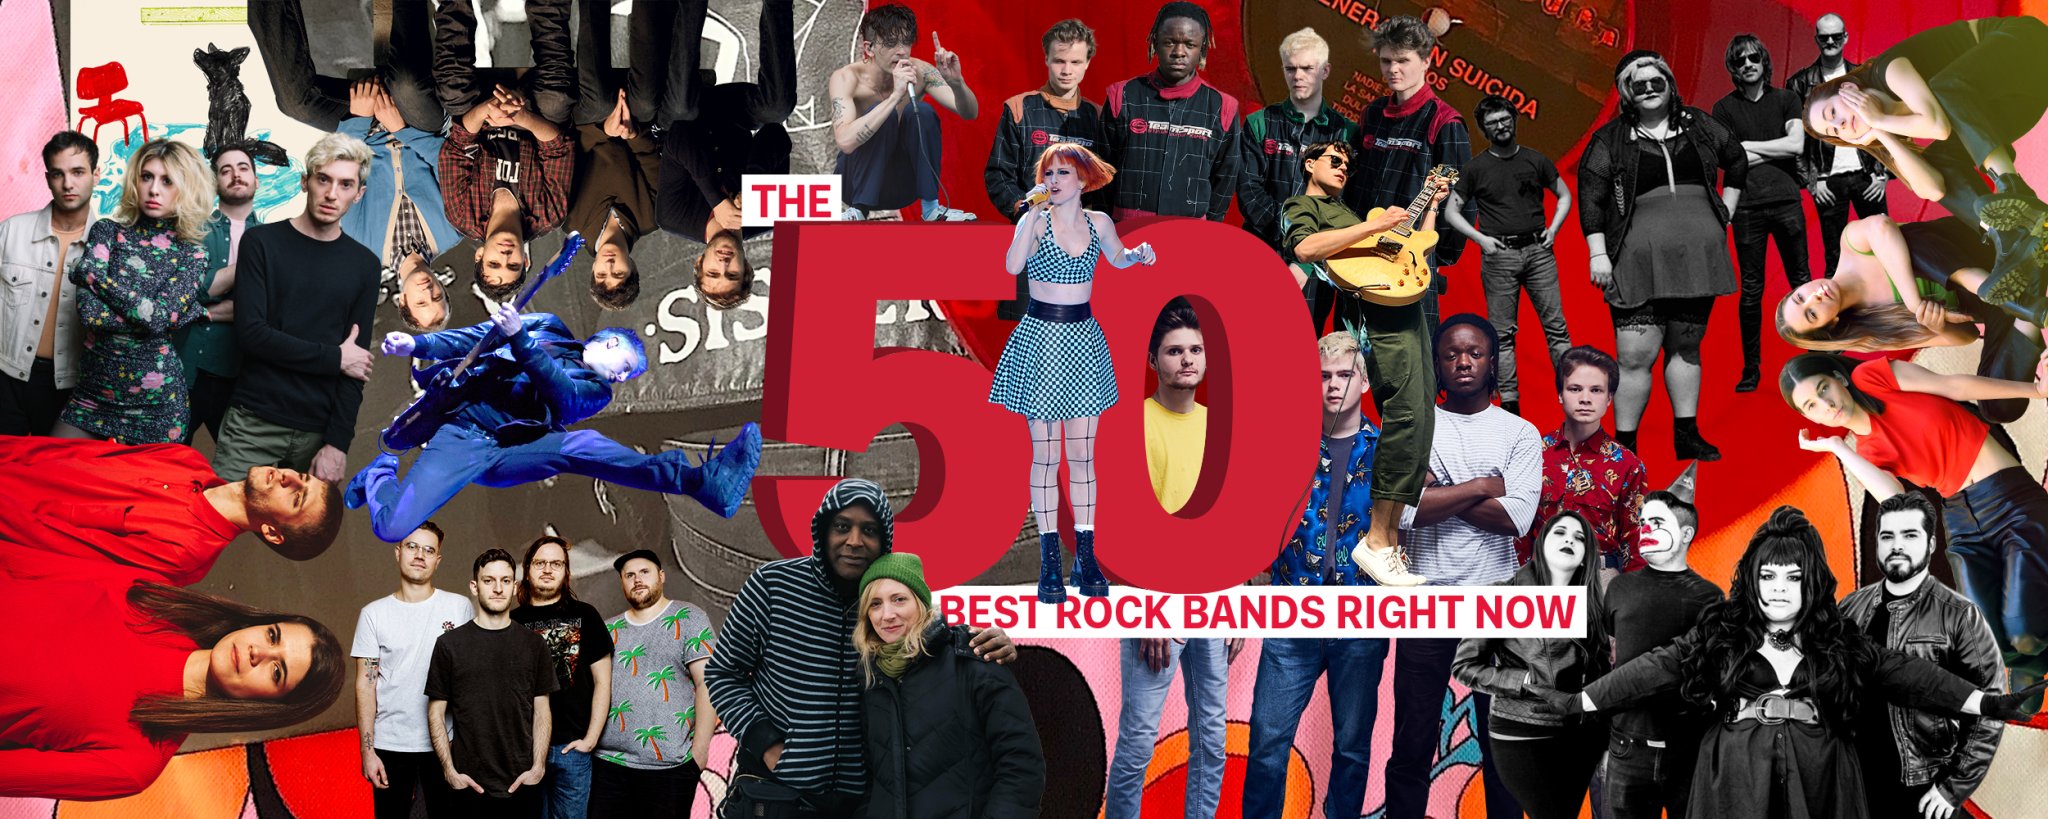 The 50 Best Rock Bands Right Now